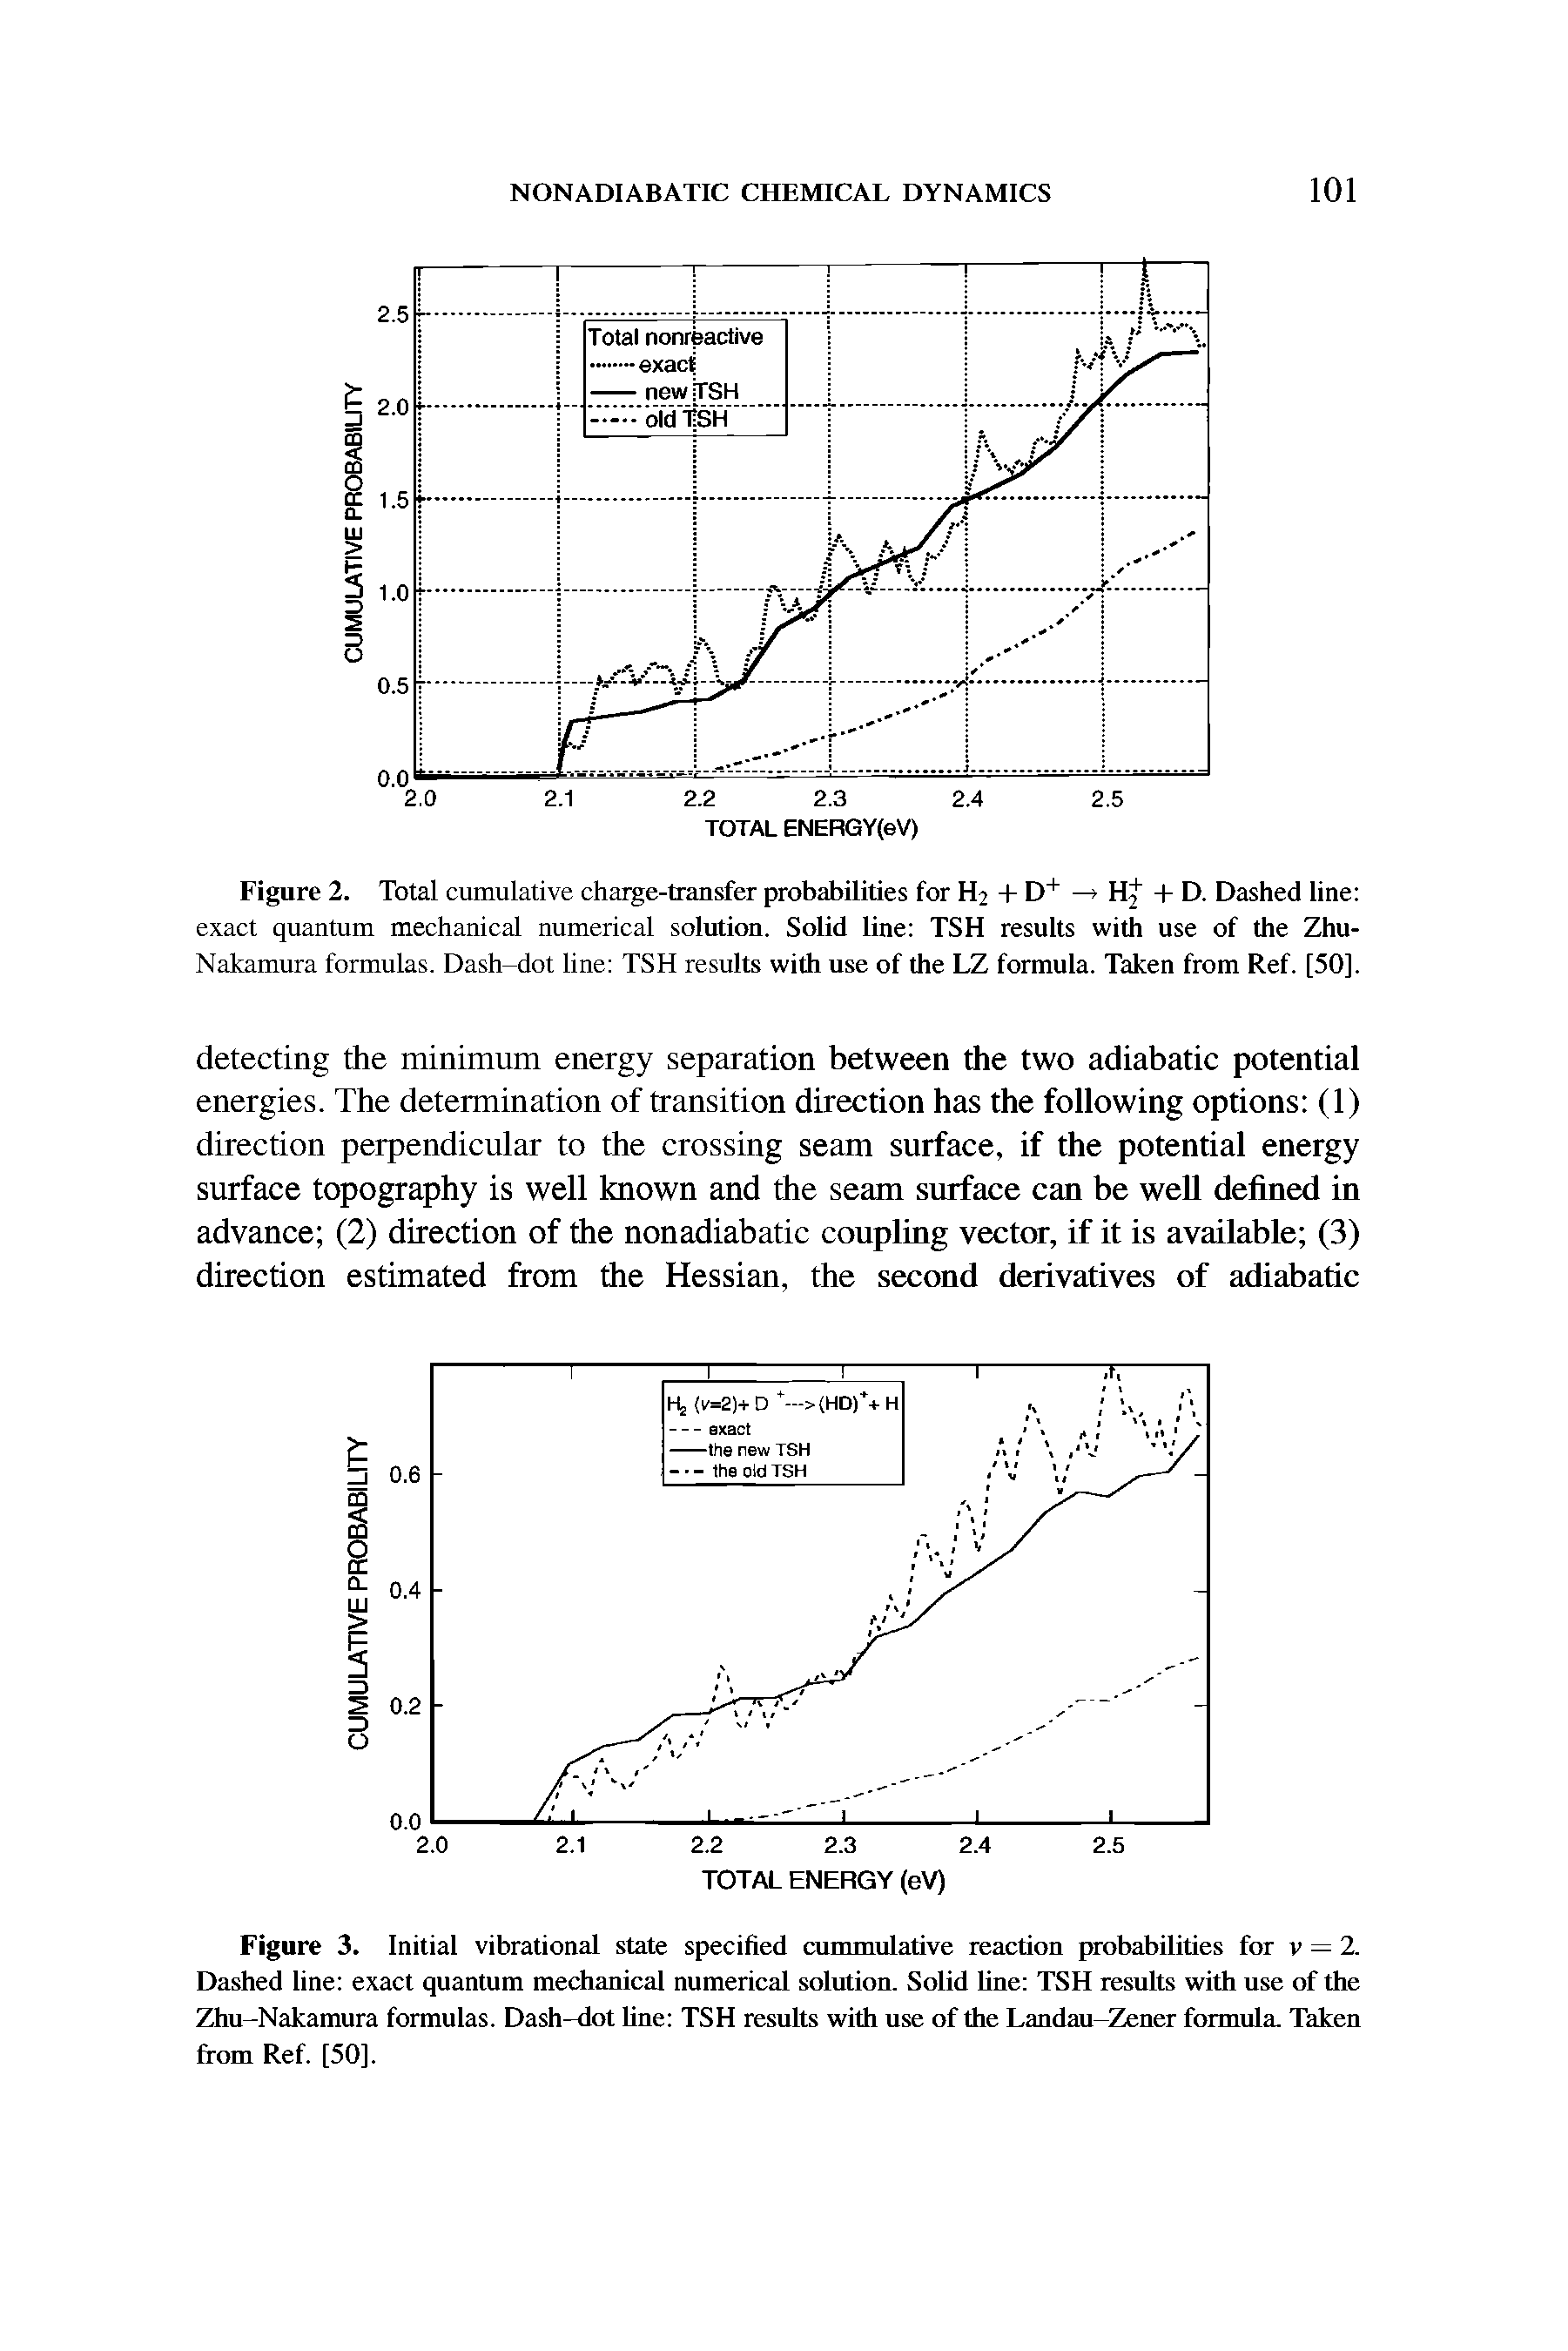 Figure 2. Total cumulative charge-transfer probabilities for H2 + D" " — Hj + D. Dashed line exact quantum mechanical numerical solution. Solid line TSH results with use of the Zhu-Nakamura formulas. Dash-dot line TSH results with use of the LZ formula. Taken from Ref. [50].